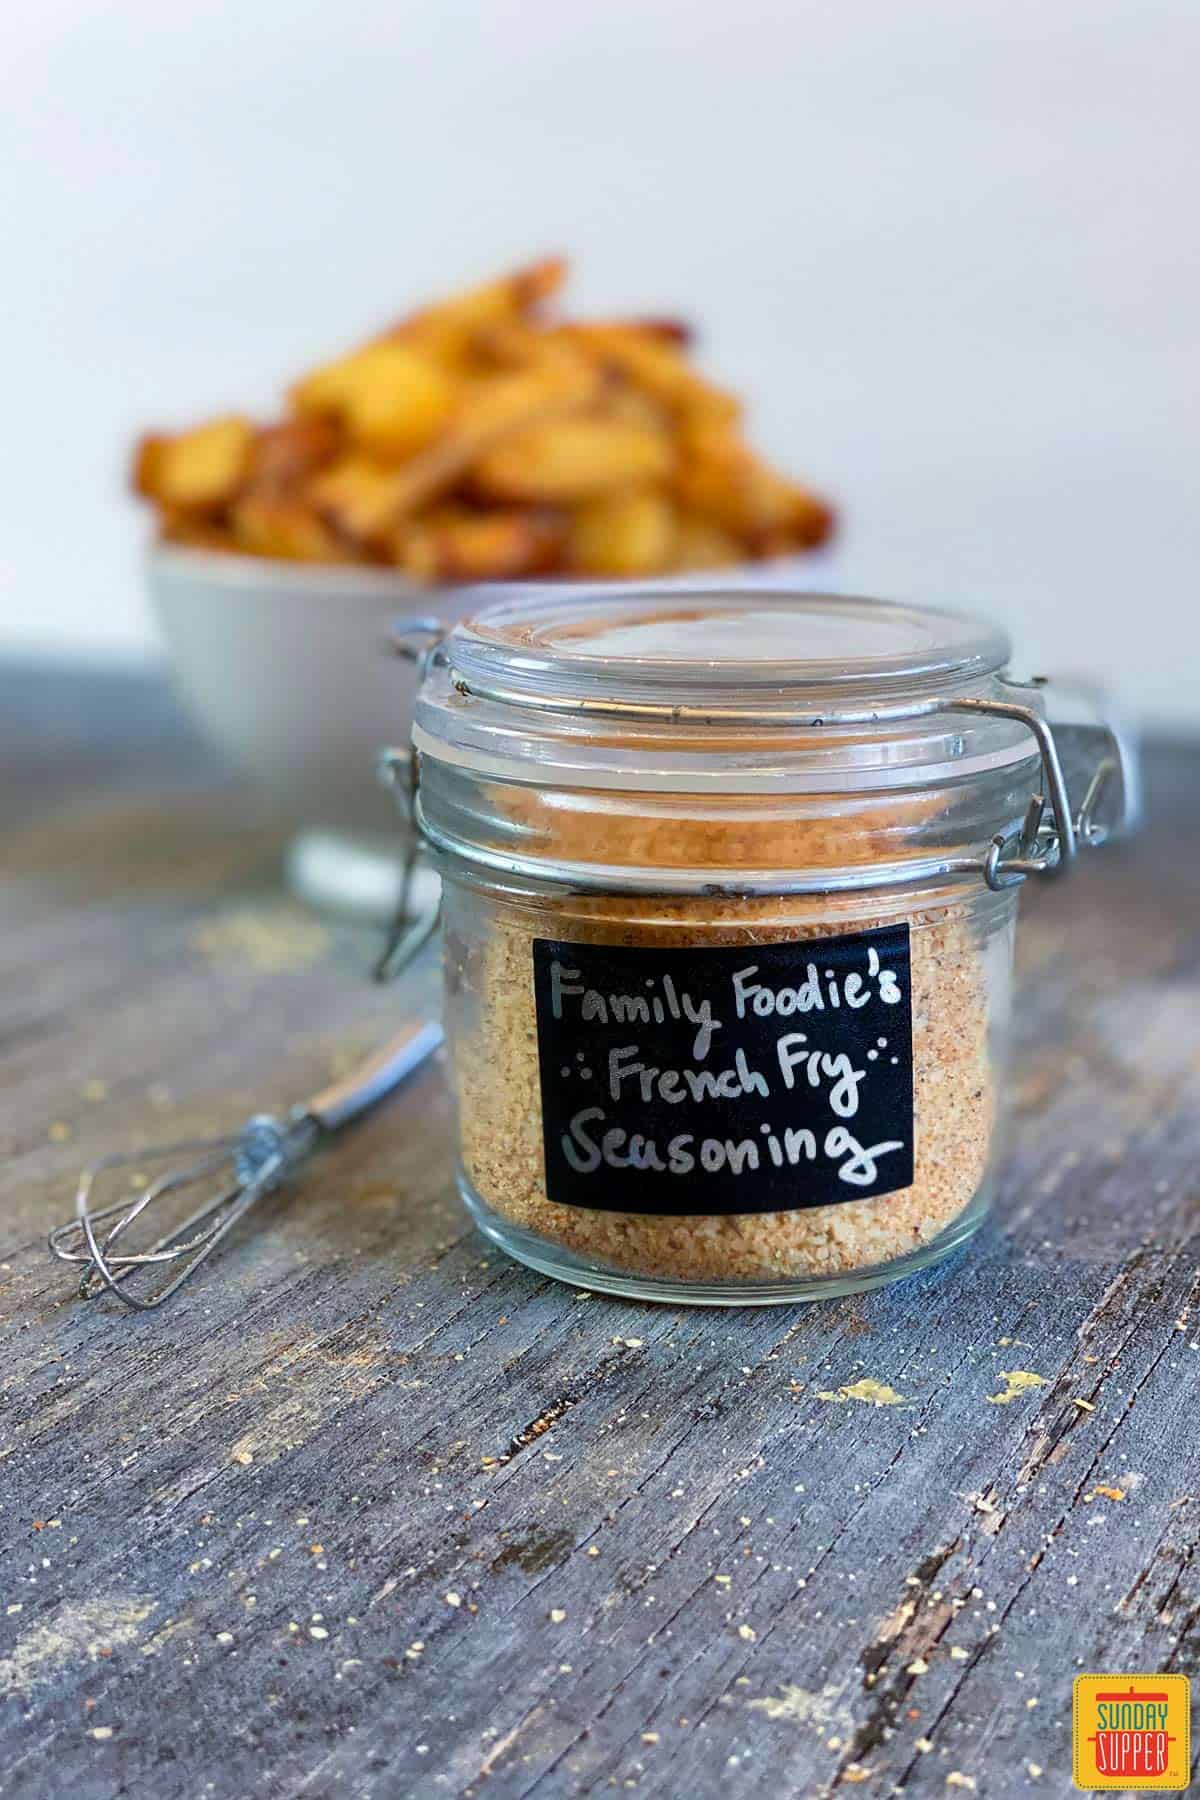 Family Foodie's French fry seasoning in a jar